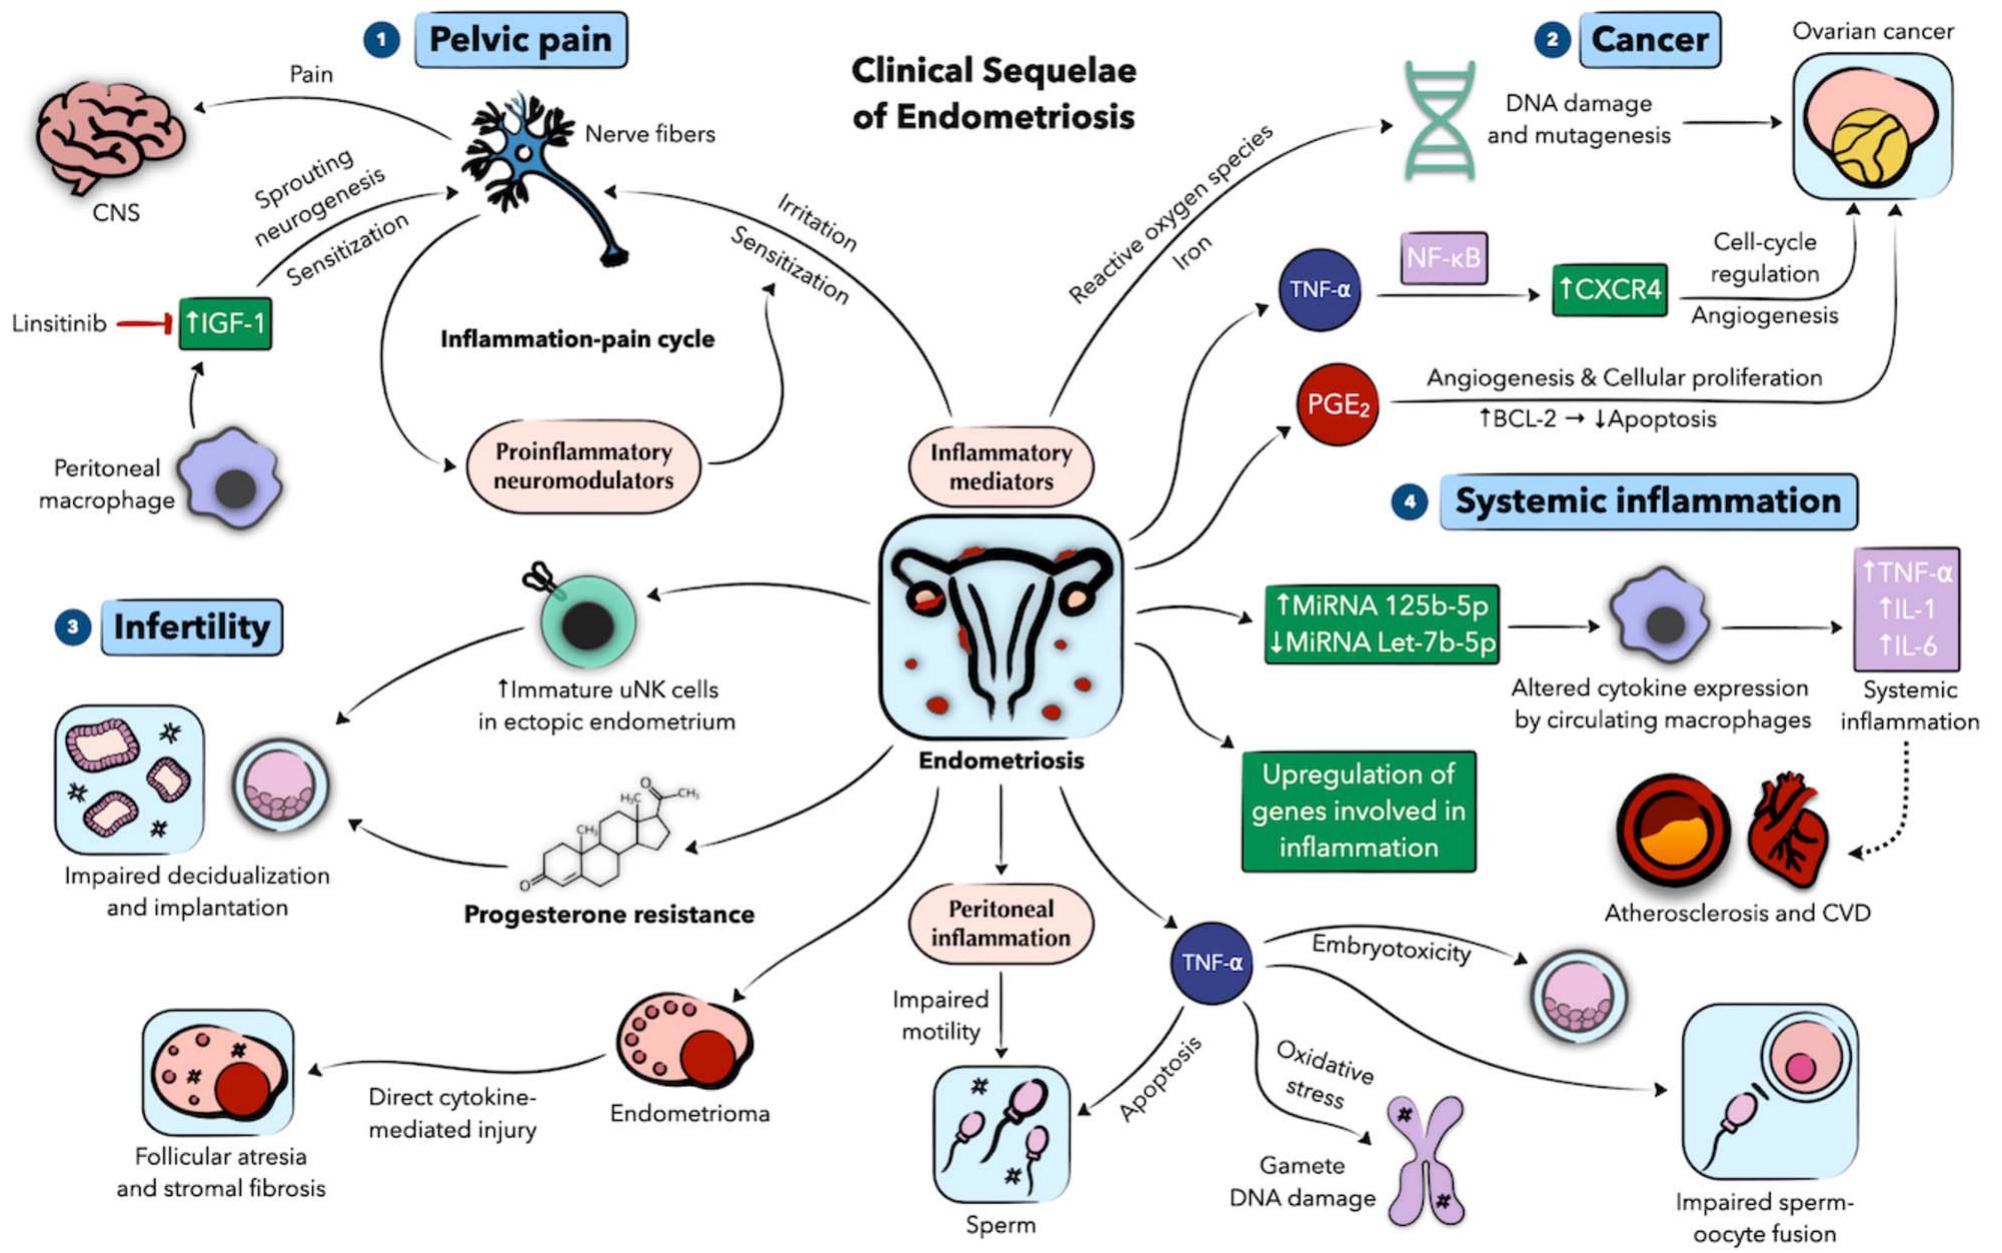 Role of inflammation in benign gynecologic disorders: from pathogenesis to  novel therapies†